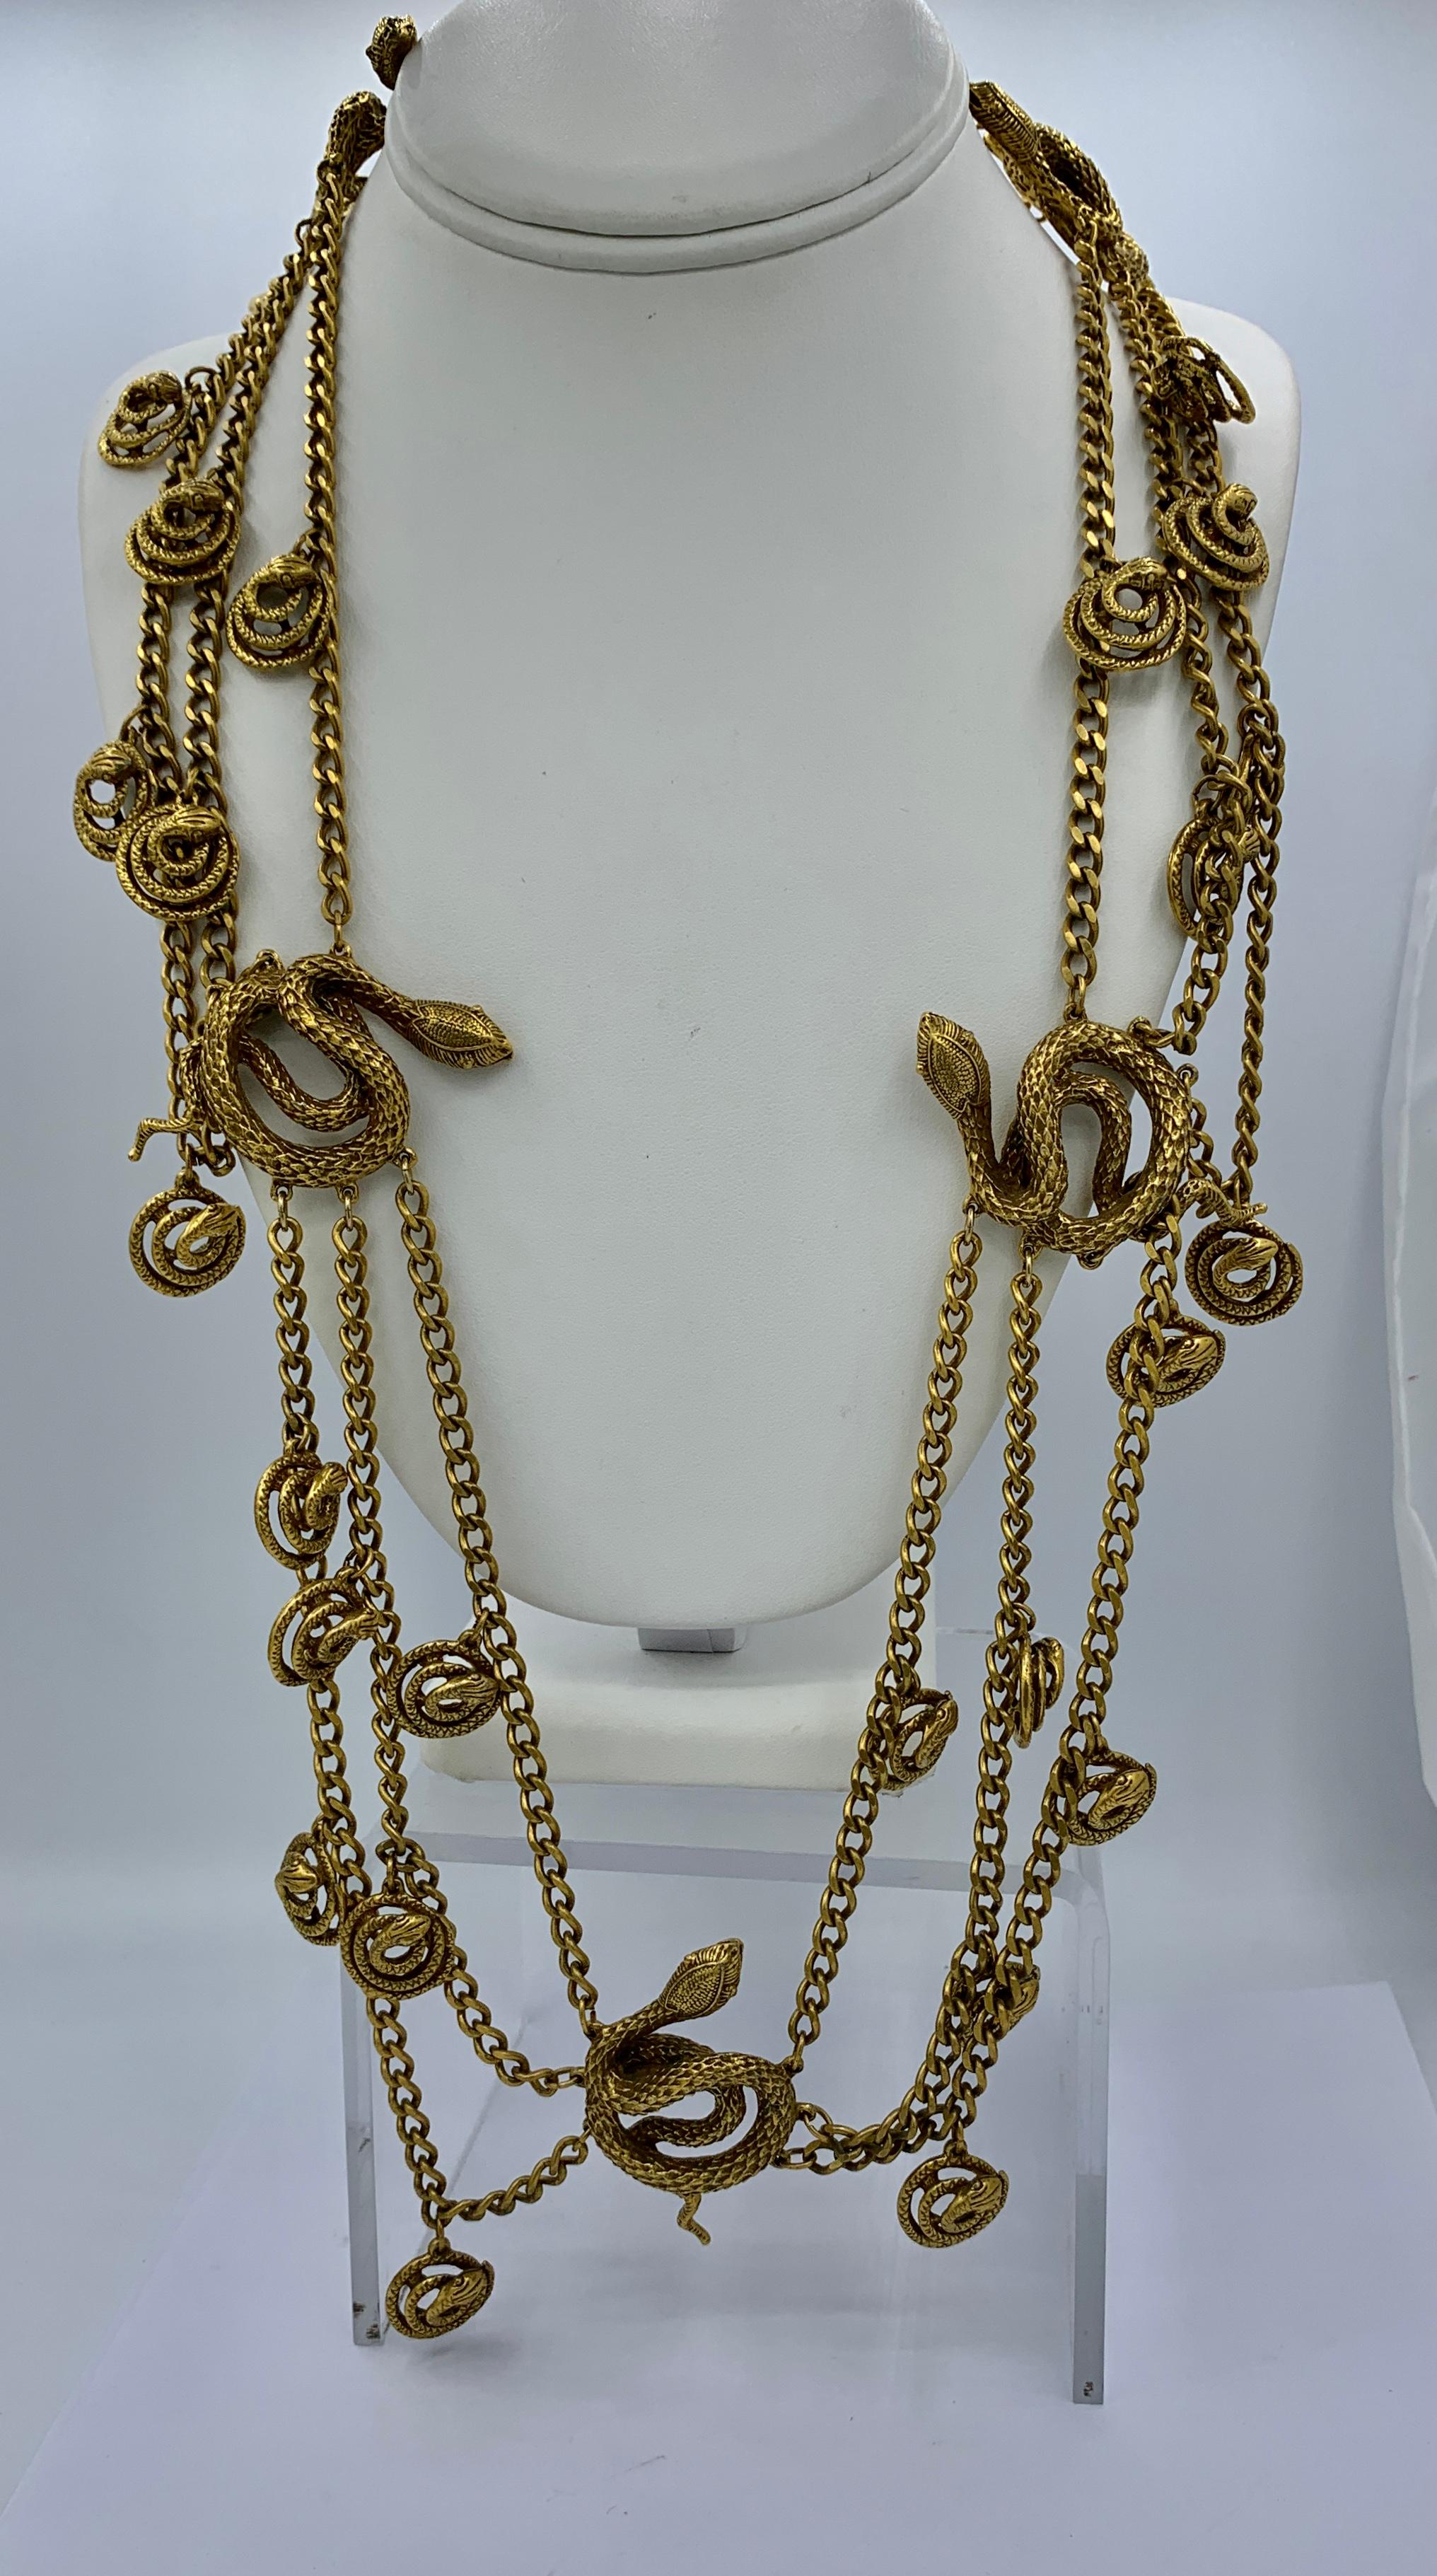 Snake Necklace or Belt Vintage Mid-Century 32 Inch Multi-Strand Statement In Excellent Condition For Sale In New York, NY